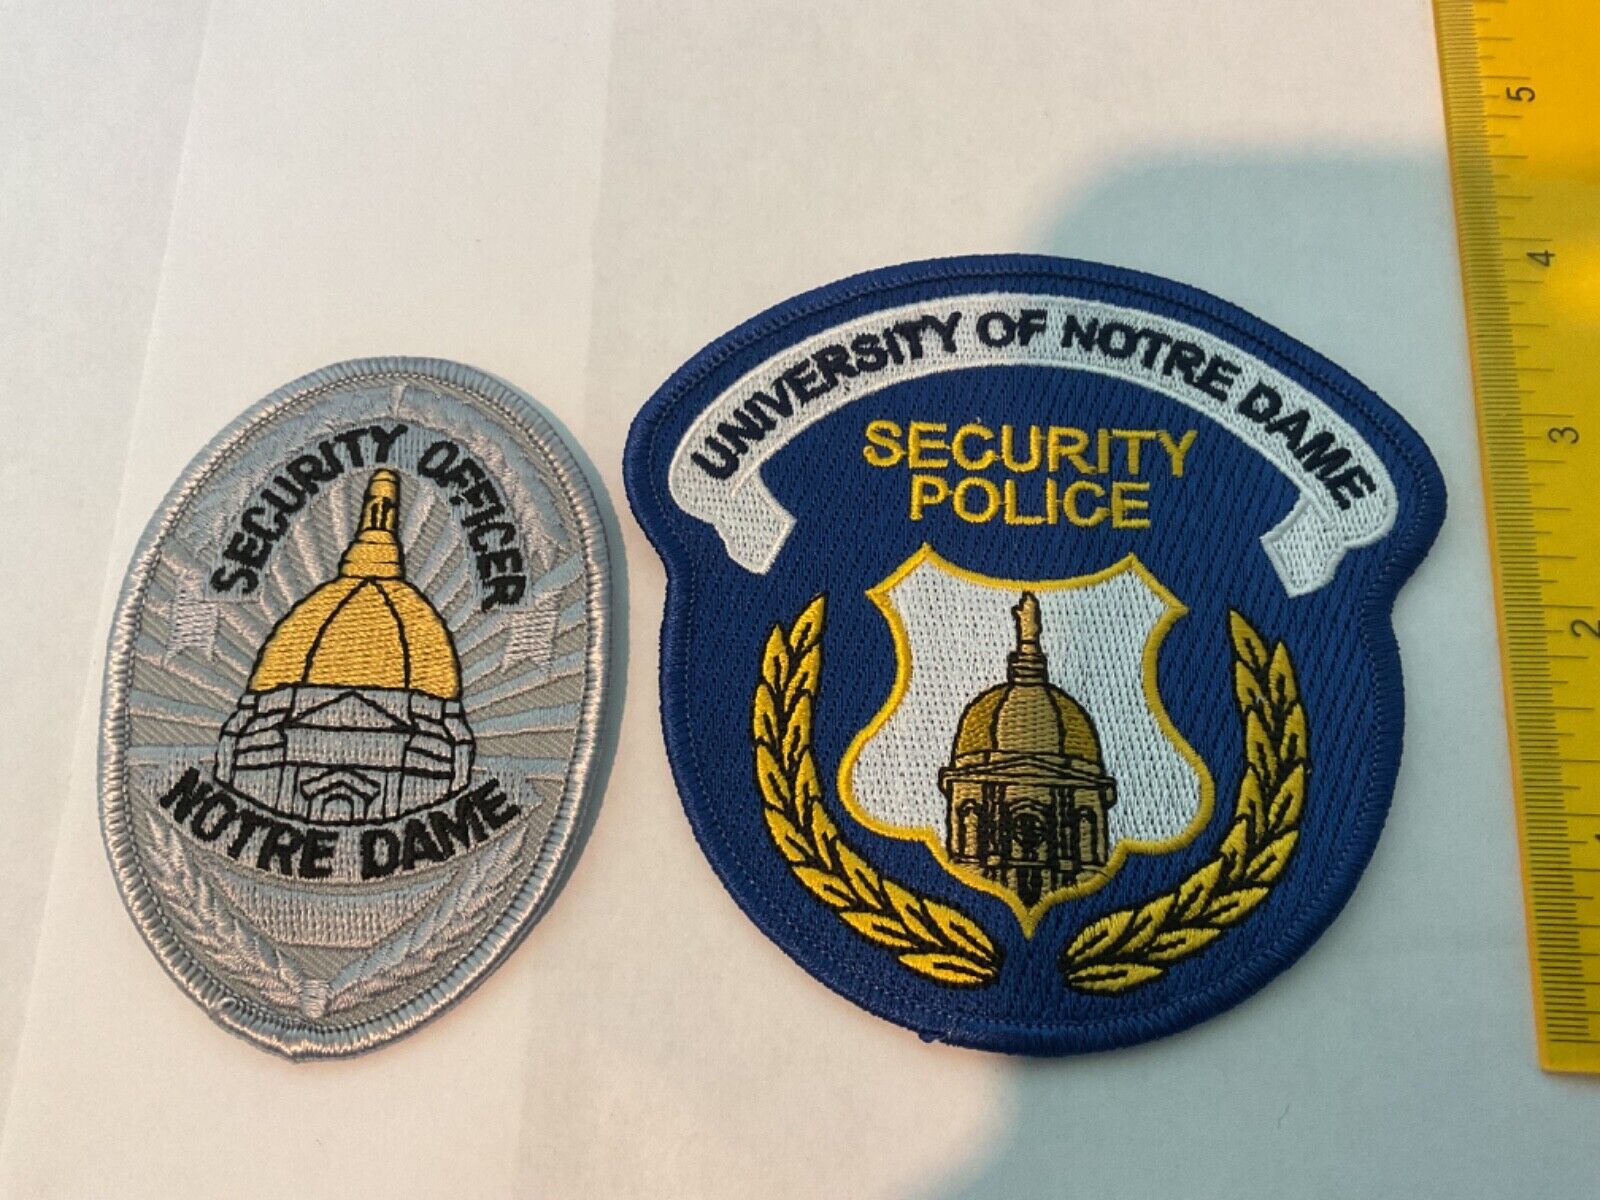 University Of Notre Dame Security Police collectors patch set 2 pieces